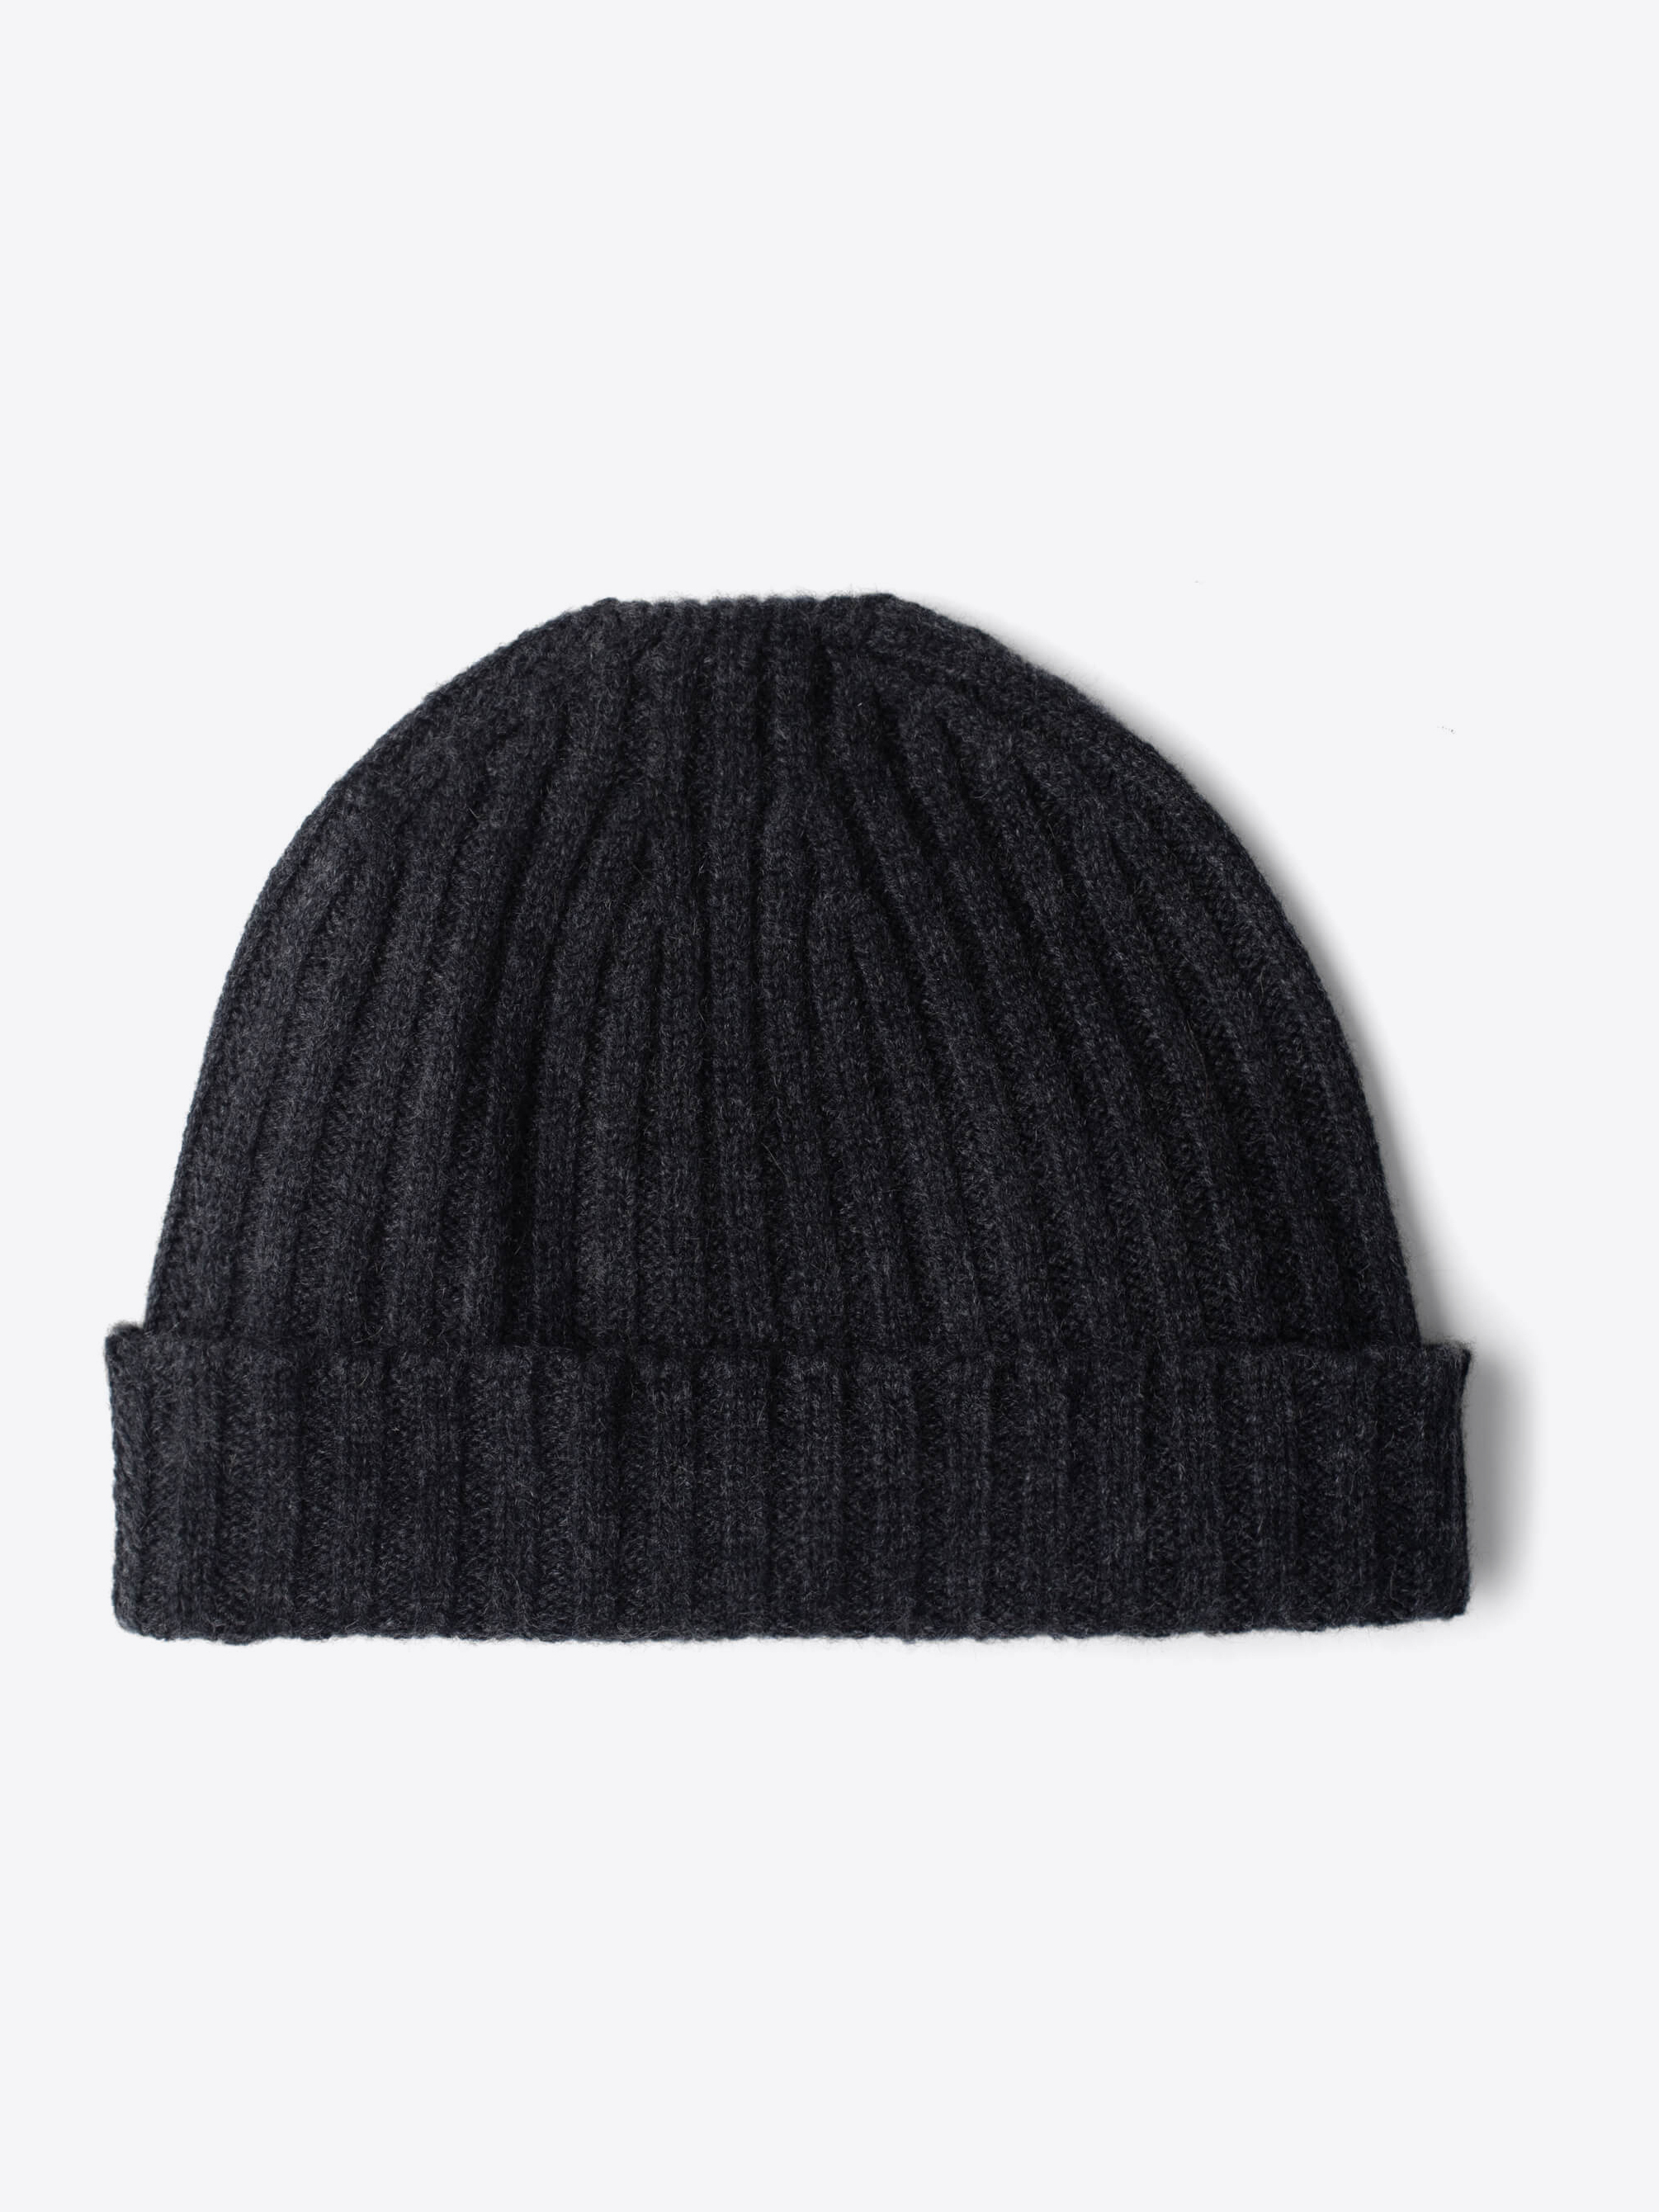 Zoom Image of Charcoal Melange Cashmere Beanie